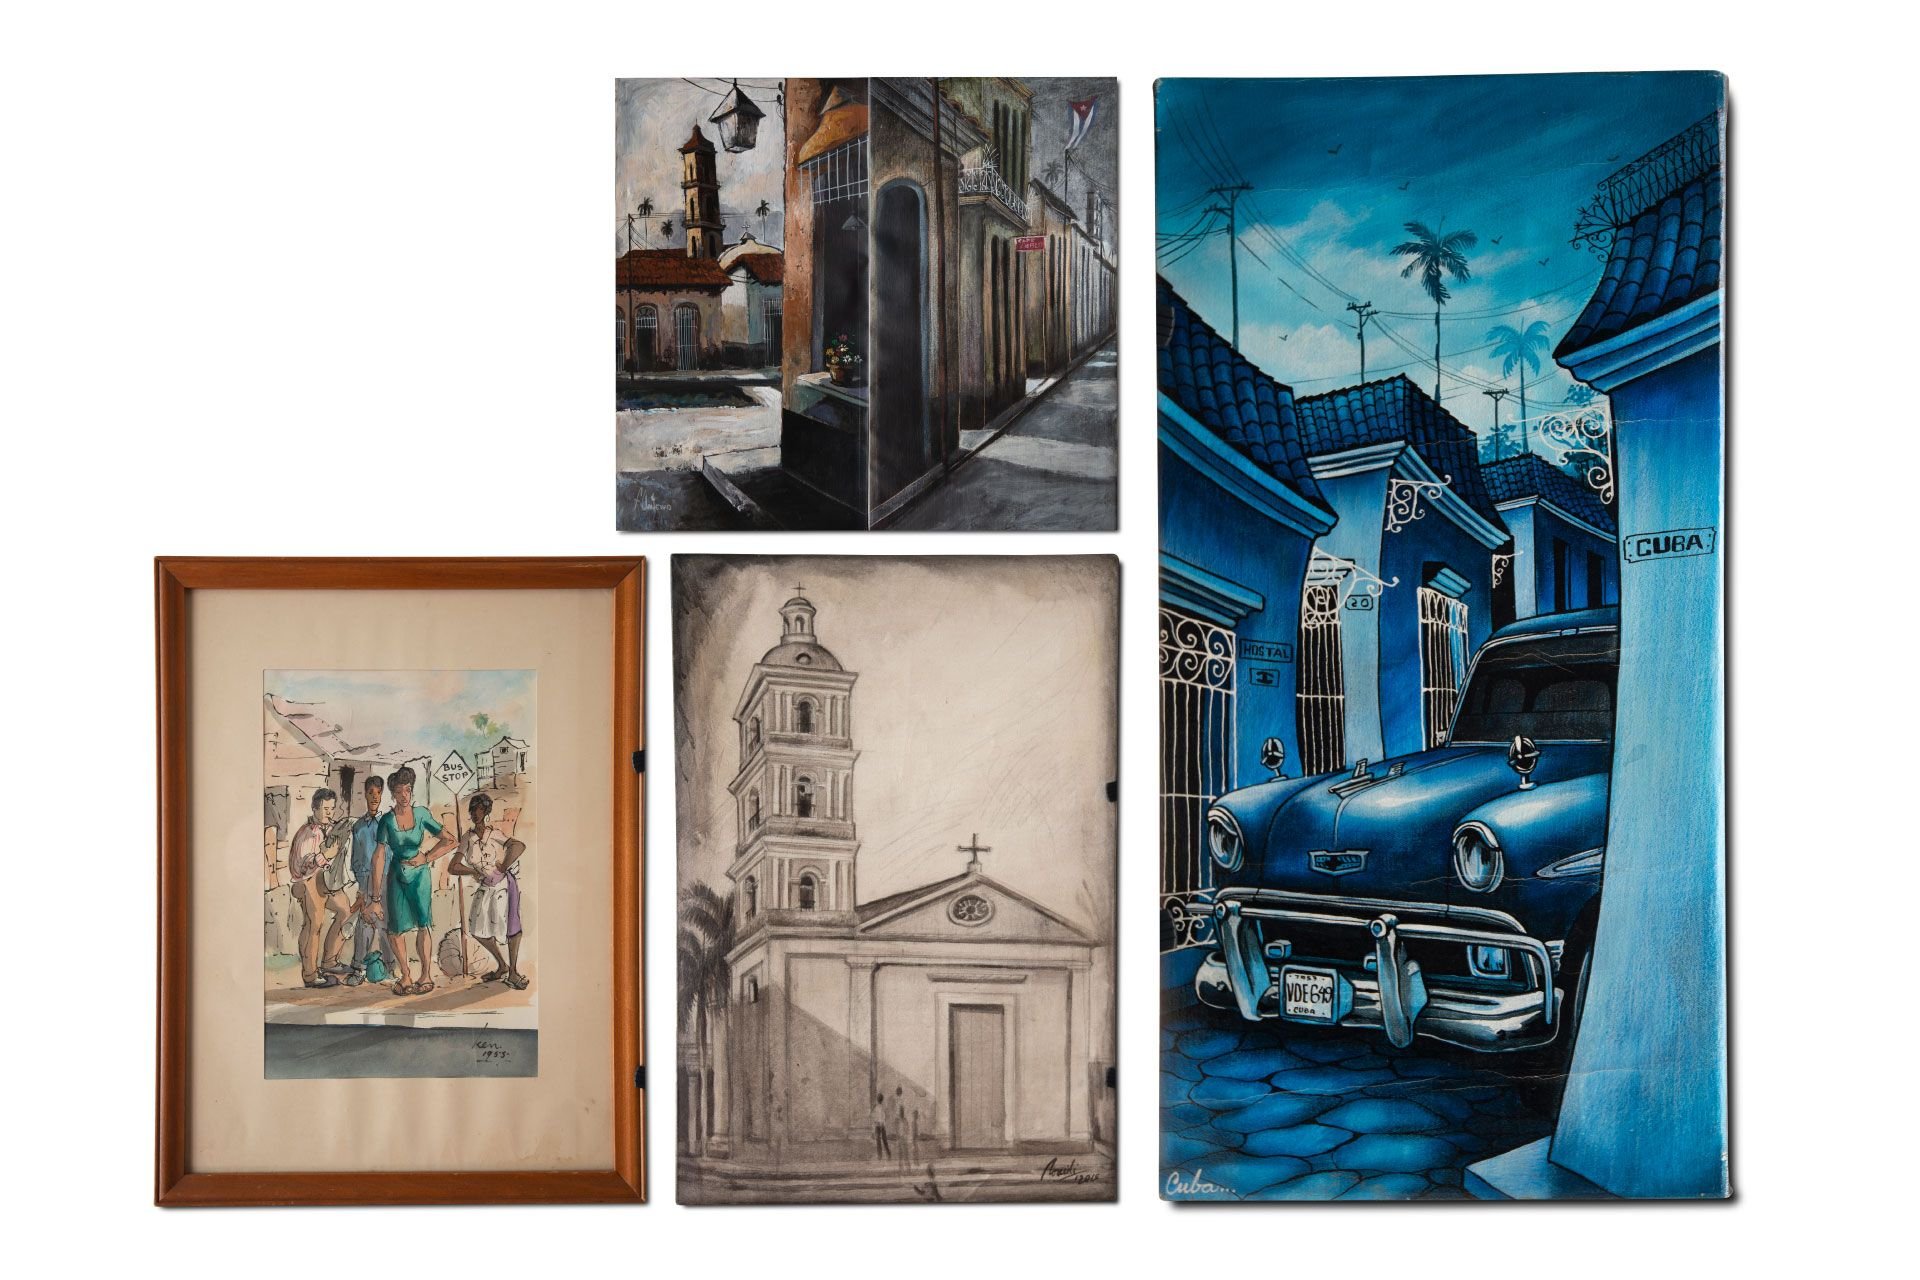 For Sale Set of 4 Modern Paintings Depicting Cuba